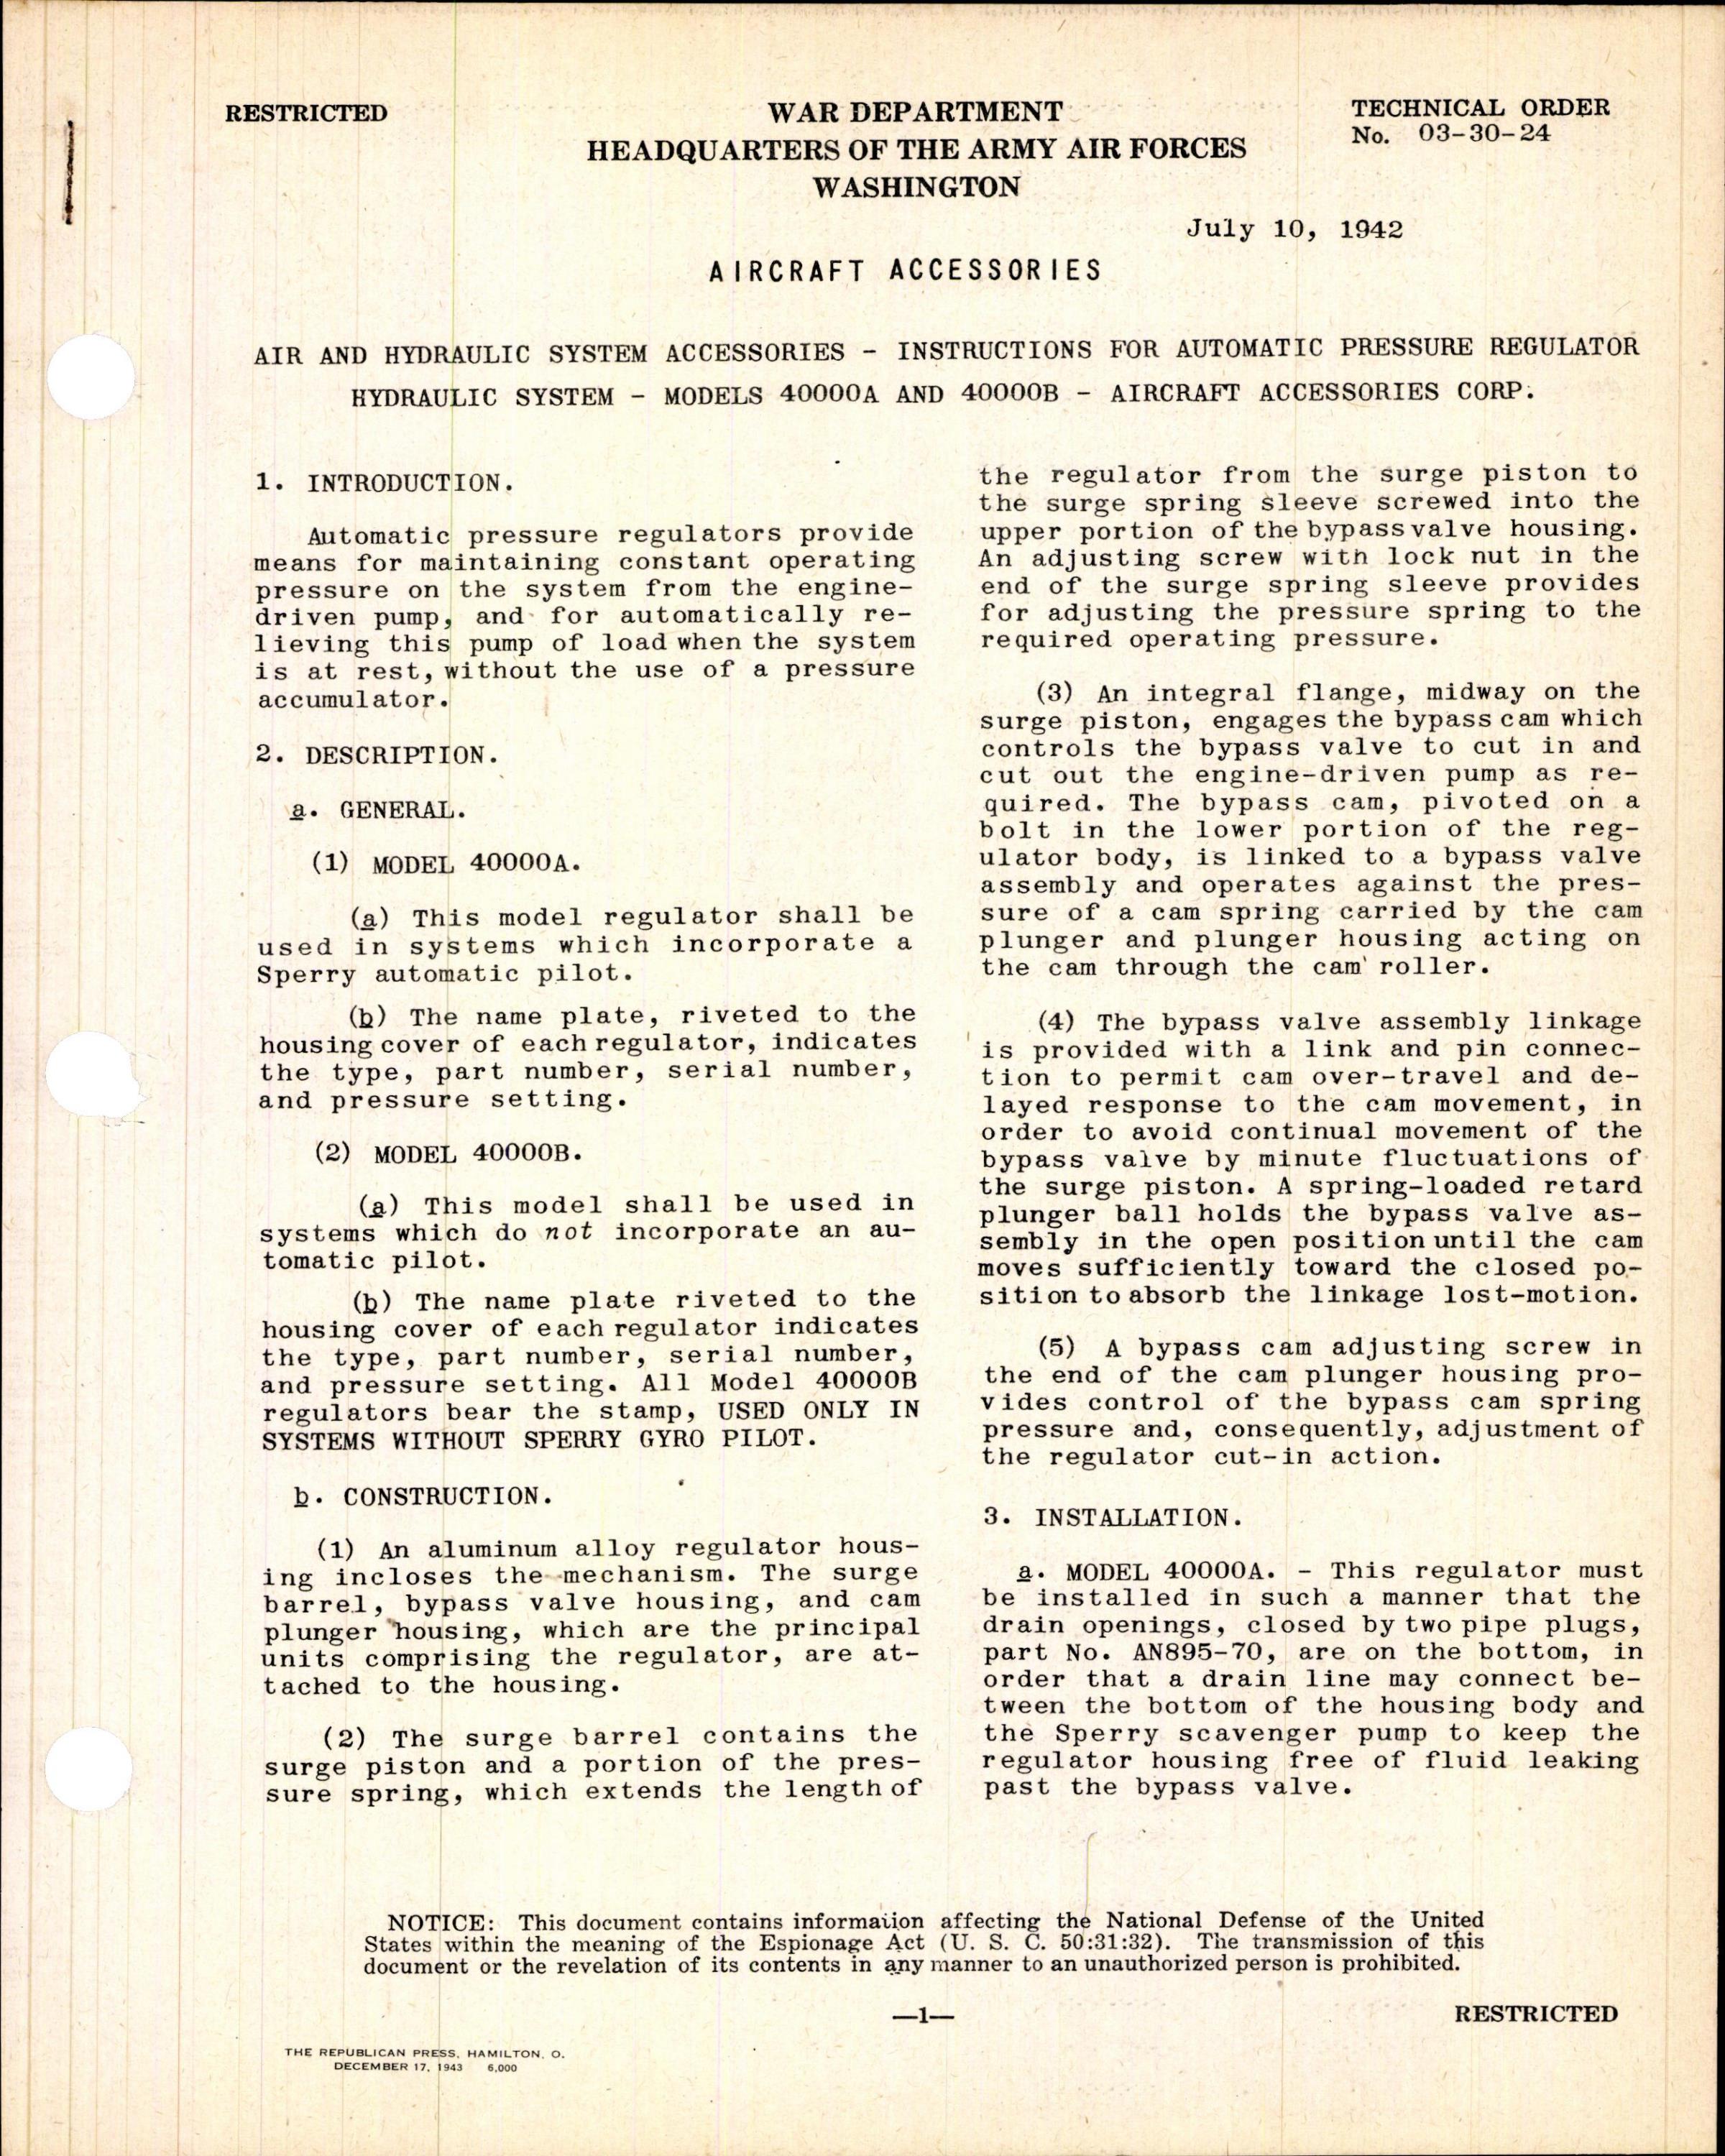 Sample page 1 from AirCorps Library document: Instructions for Automatic Pressure Regulator Hydraulic System